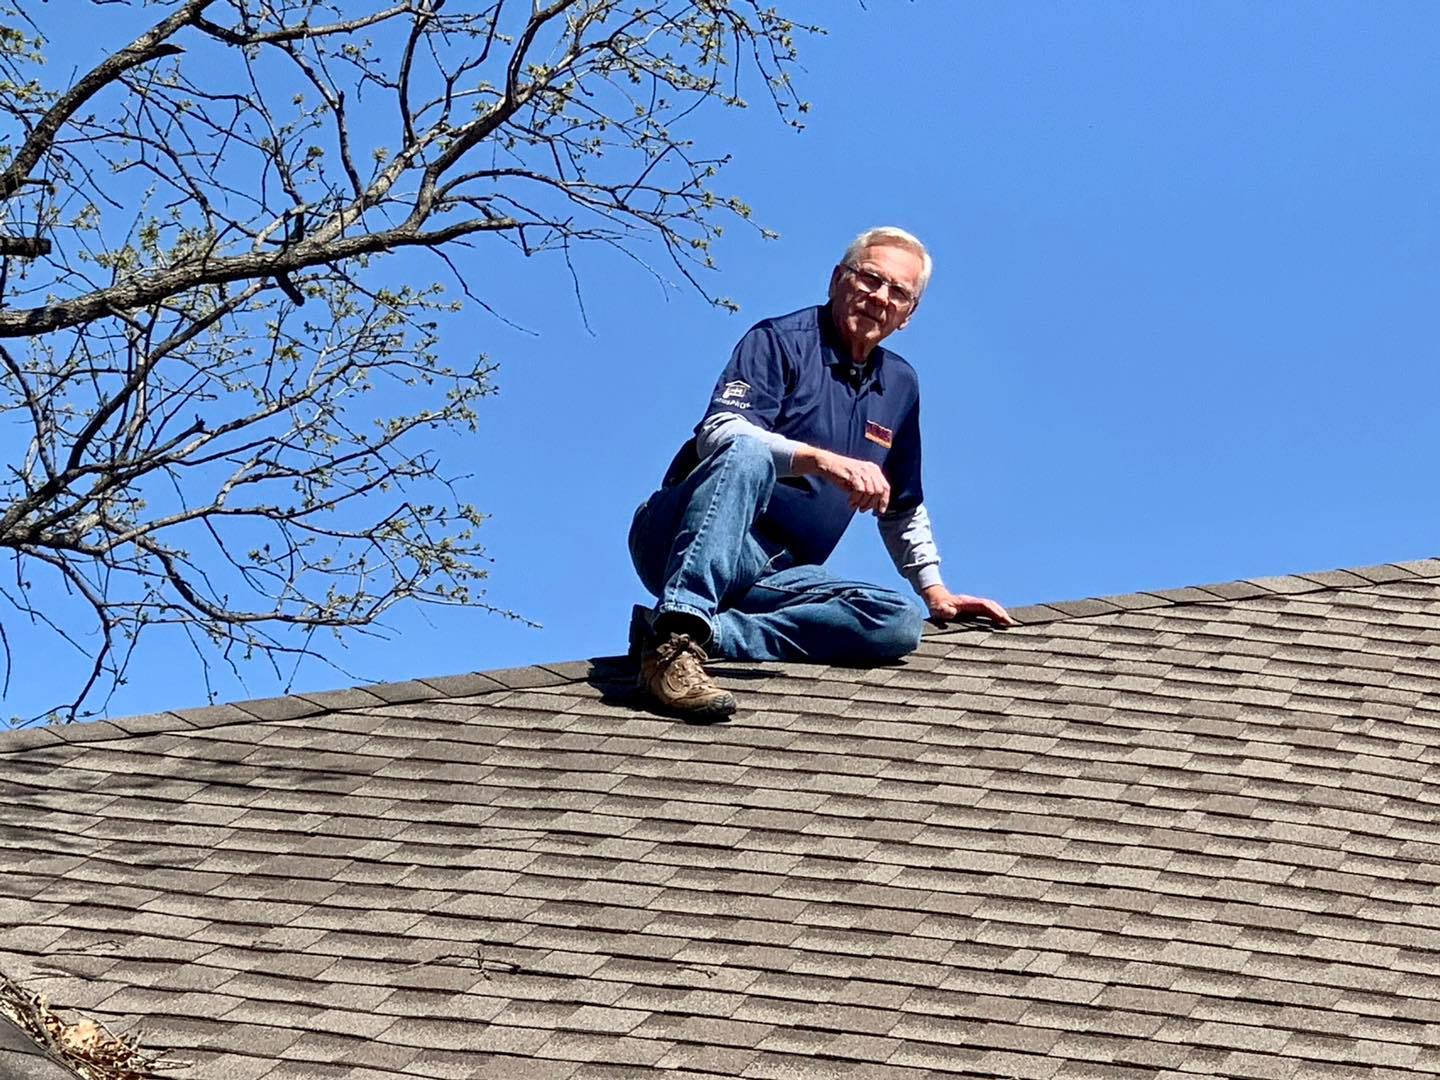 A man is sitting on top of a roof with a tree in the background.